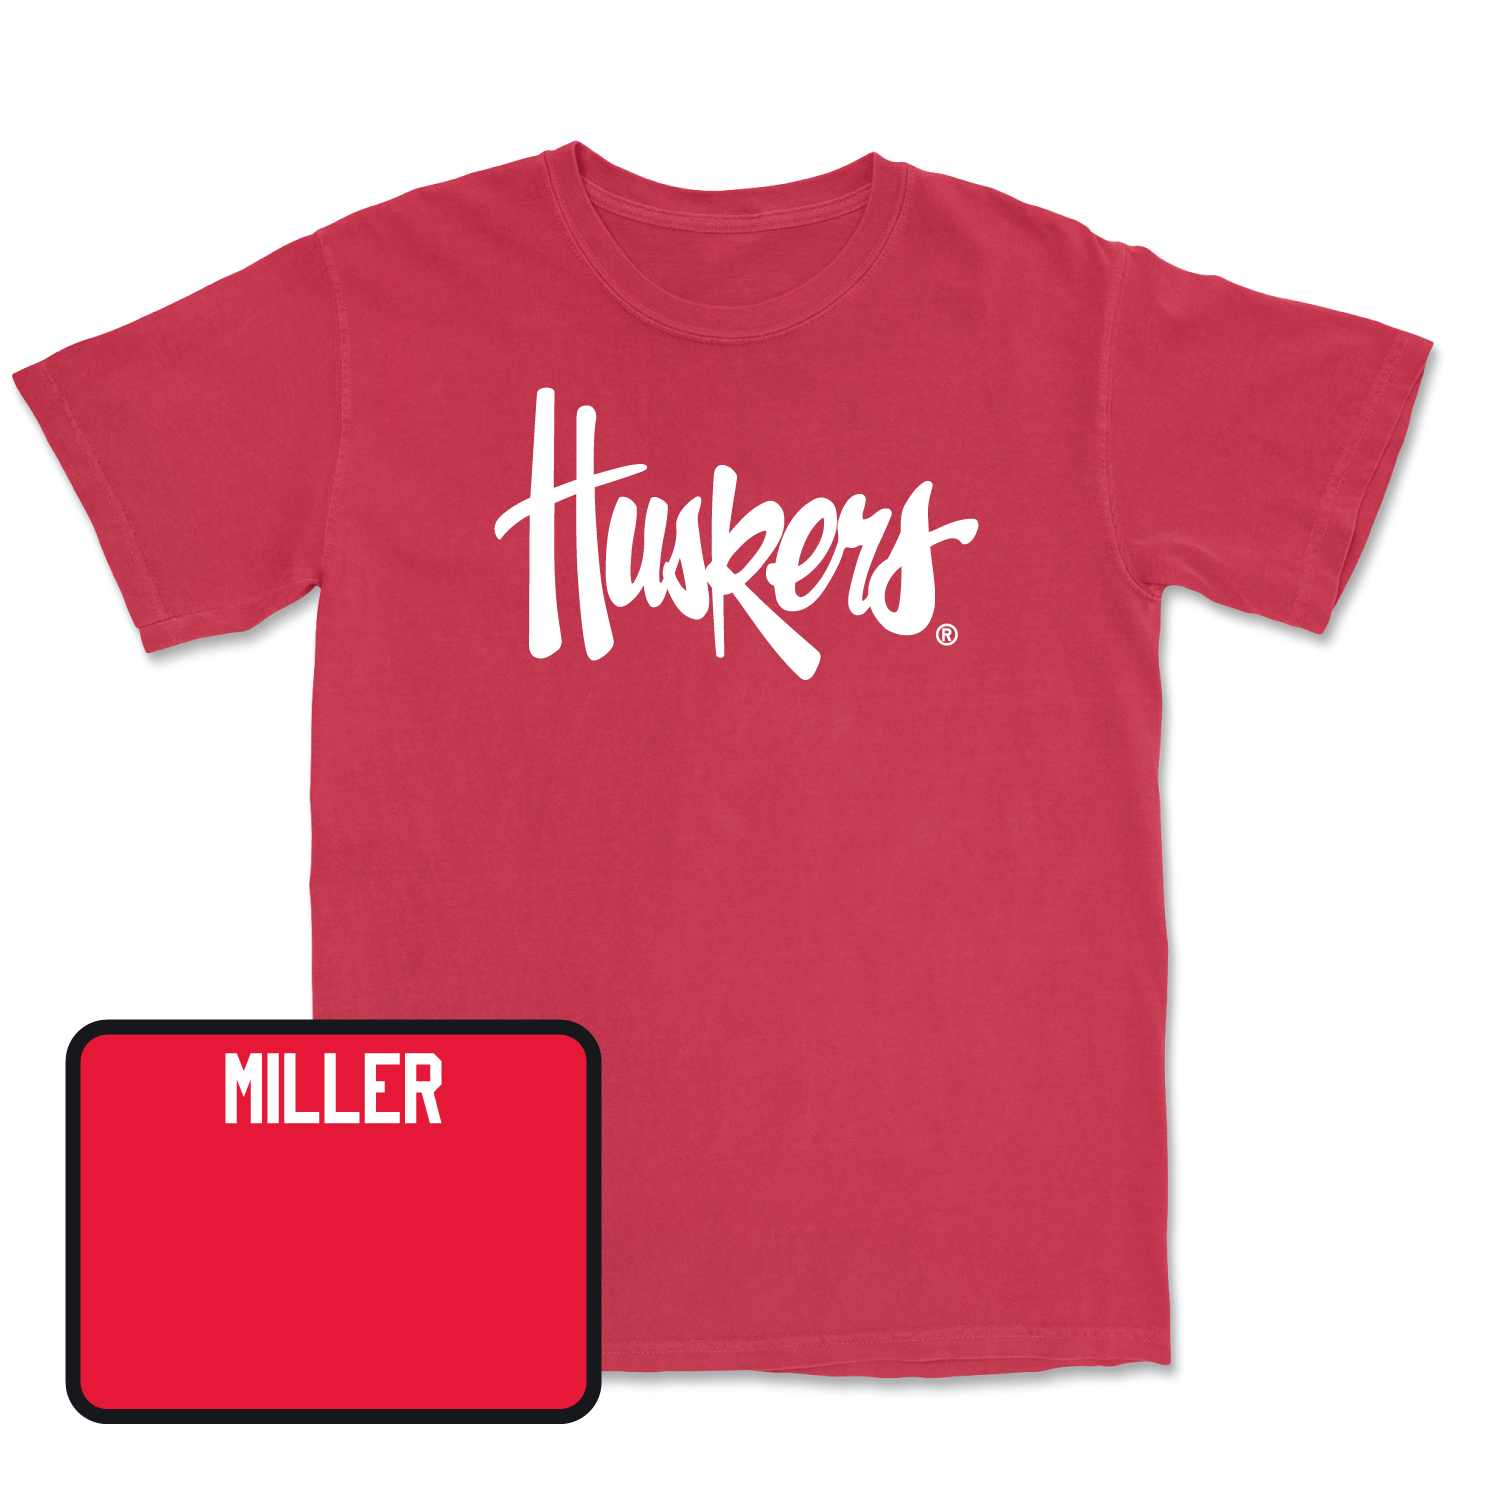 Red Track & Field Huskers Tee 4X-Large / Brooklyn Miller